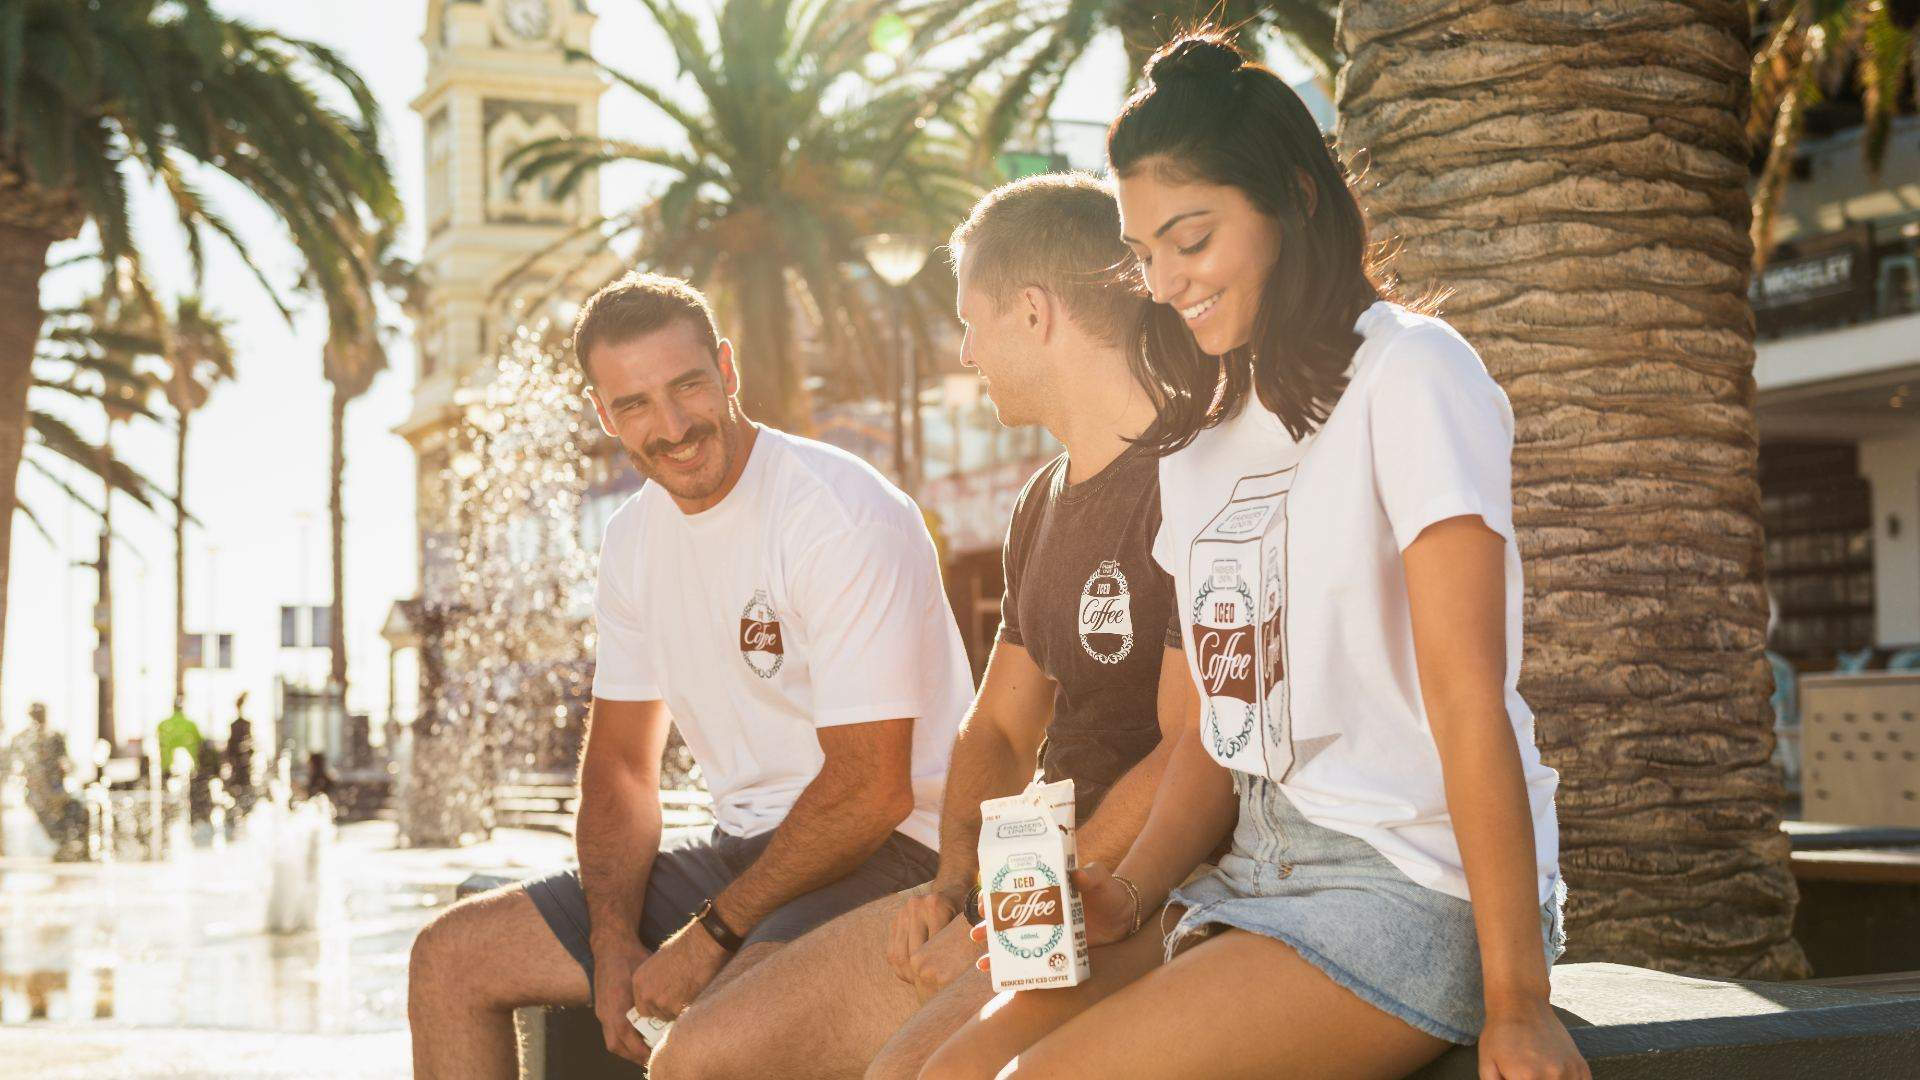 SA's Farmers Union Iced Coffee Is the Latest Aussie Brand to Release Its Own Retro Line of Merch